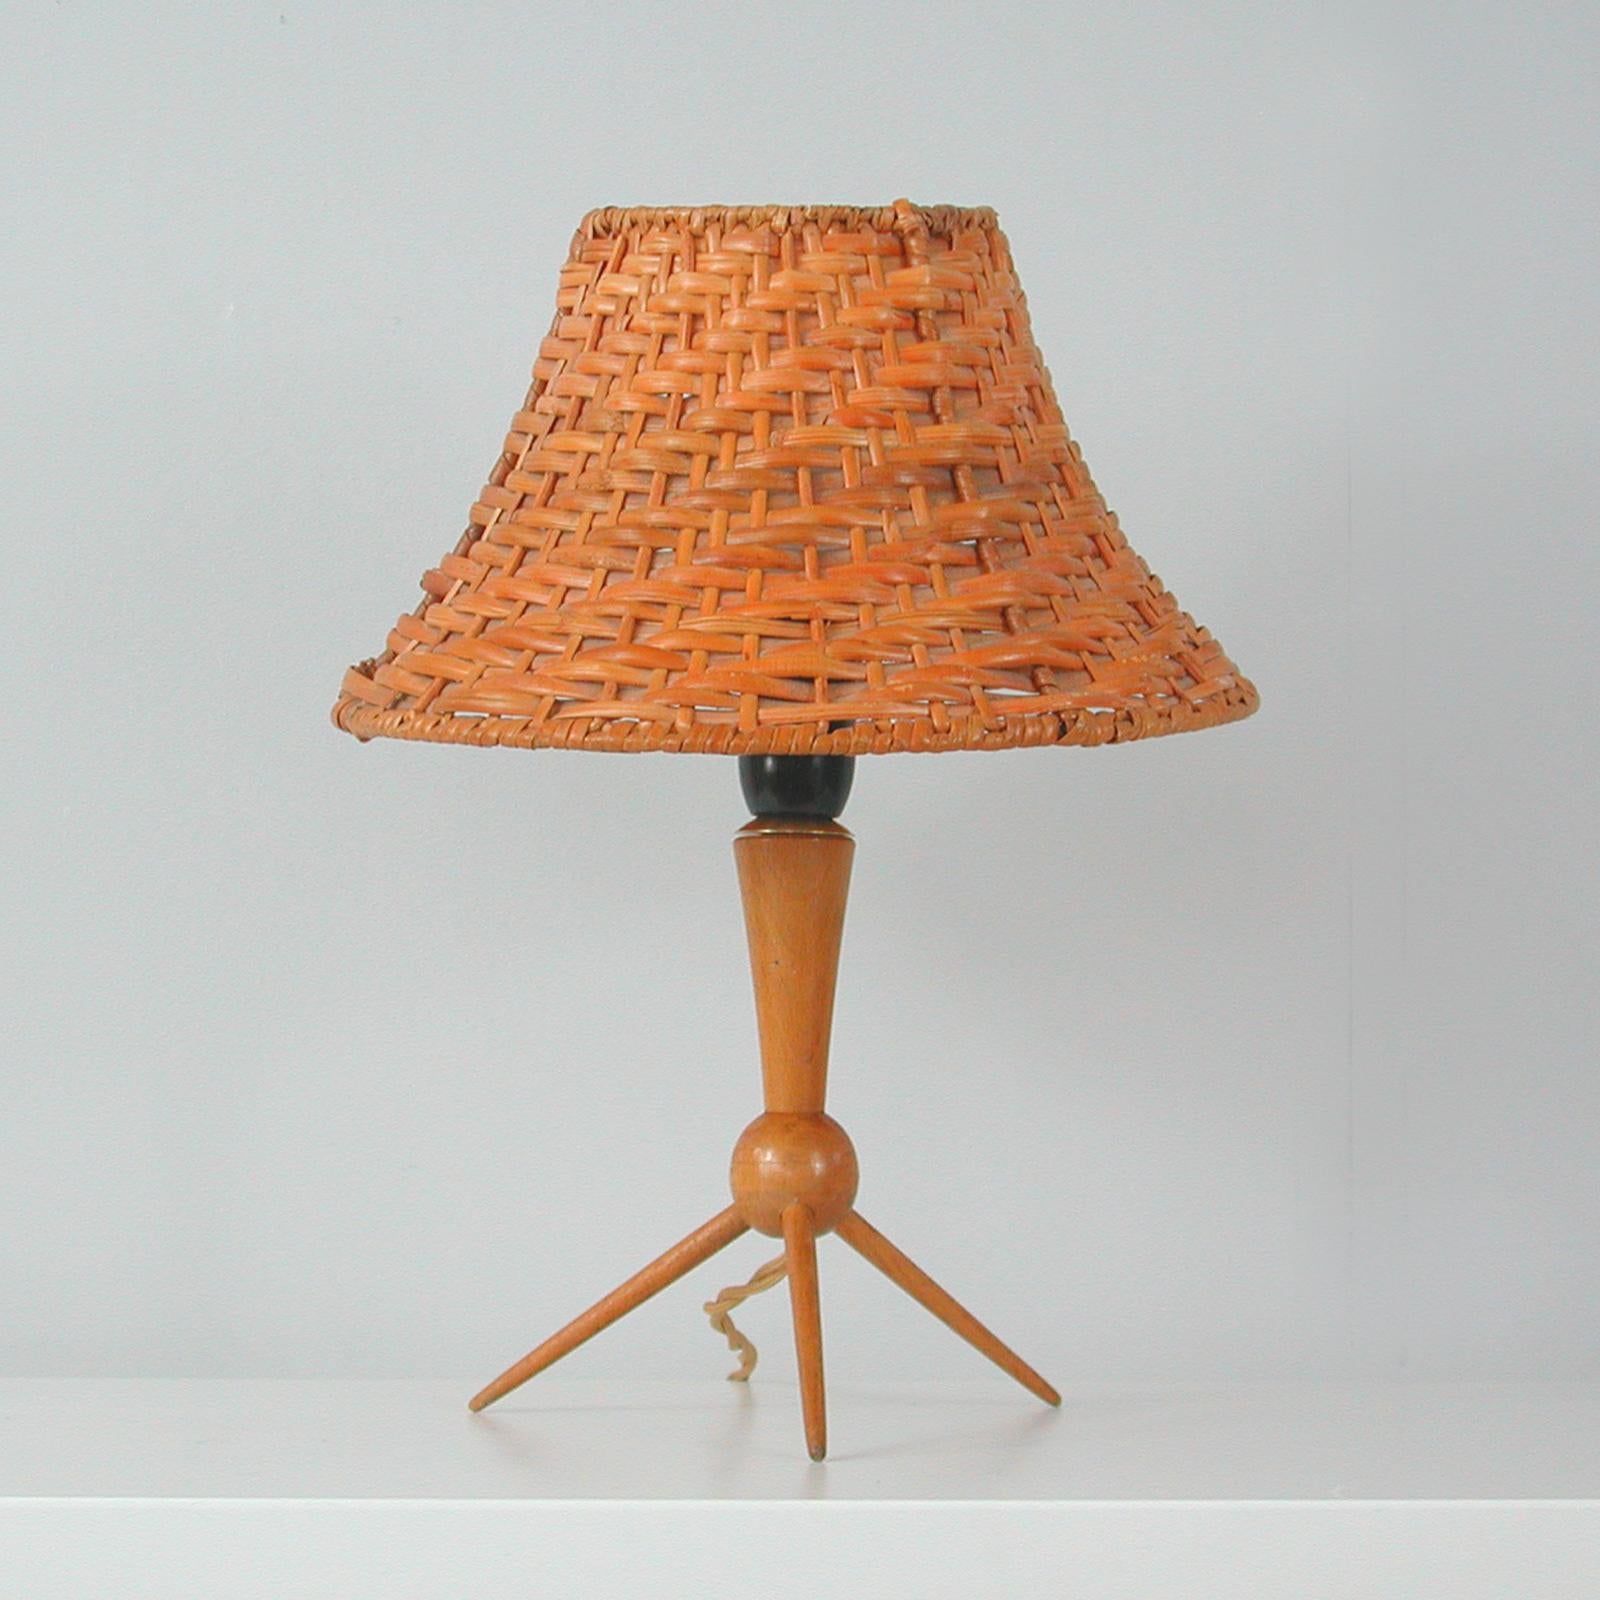 Swedish Mid-Century Rattan Wicker and Birch Tripod Table Lamp, Sweden, 1950s For Sale